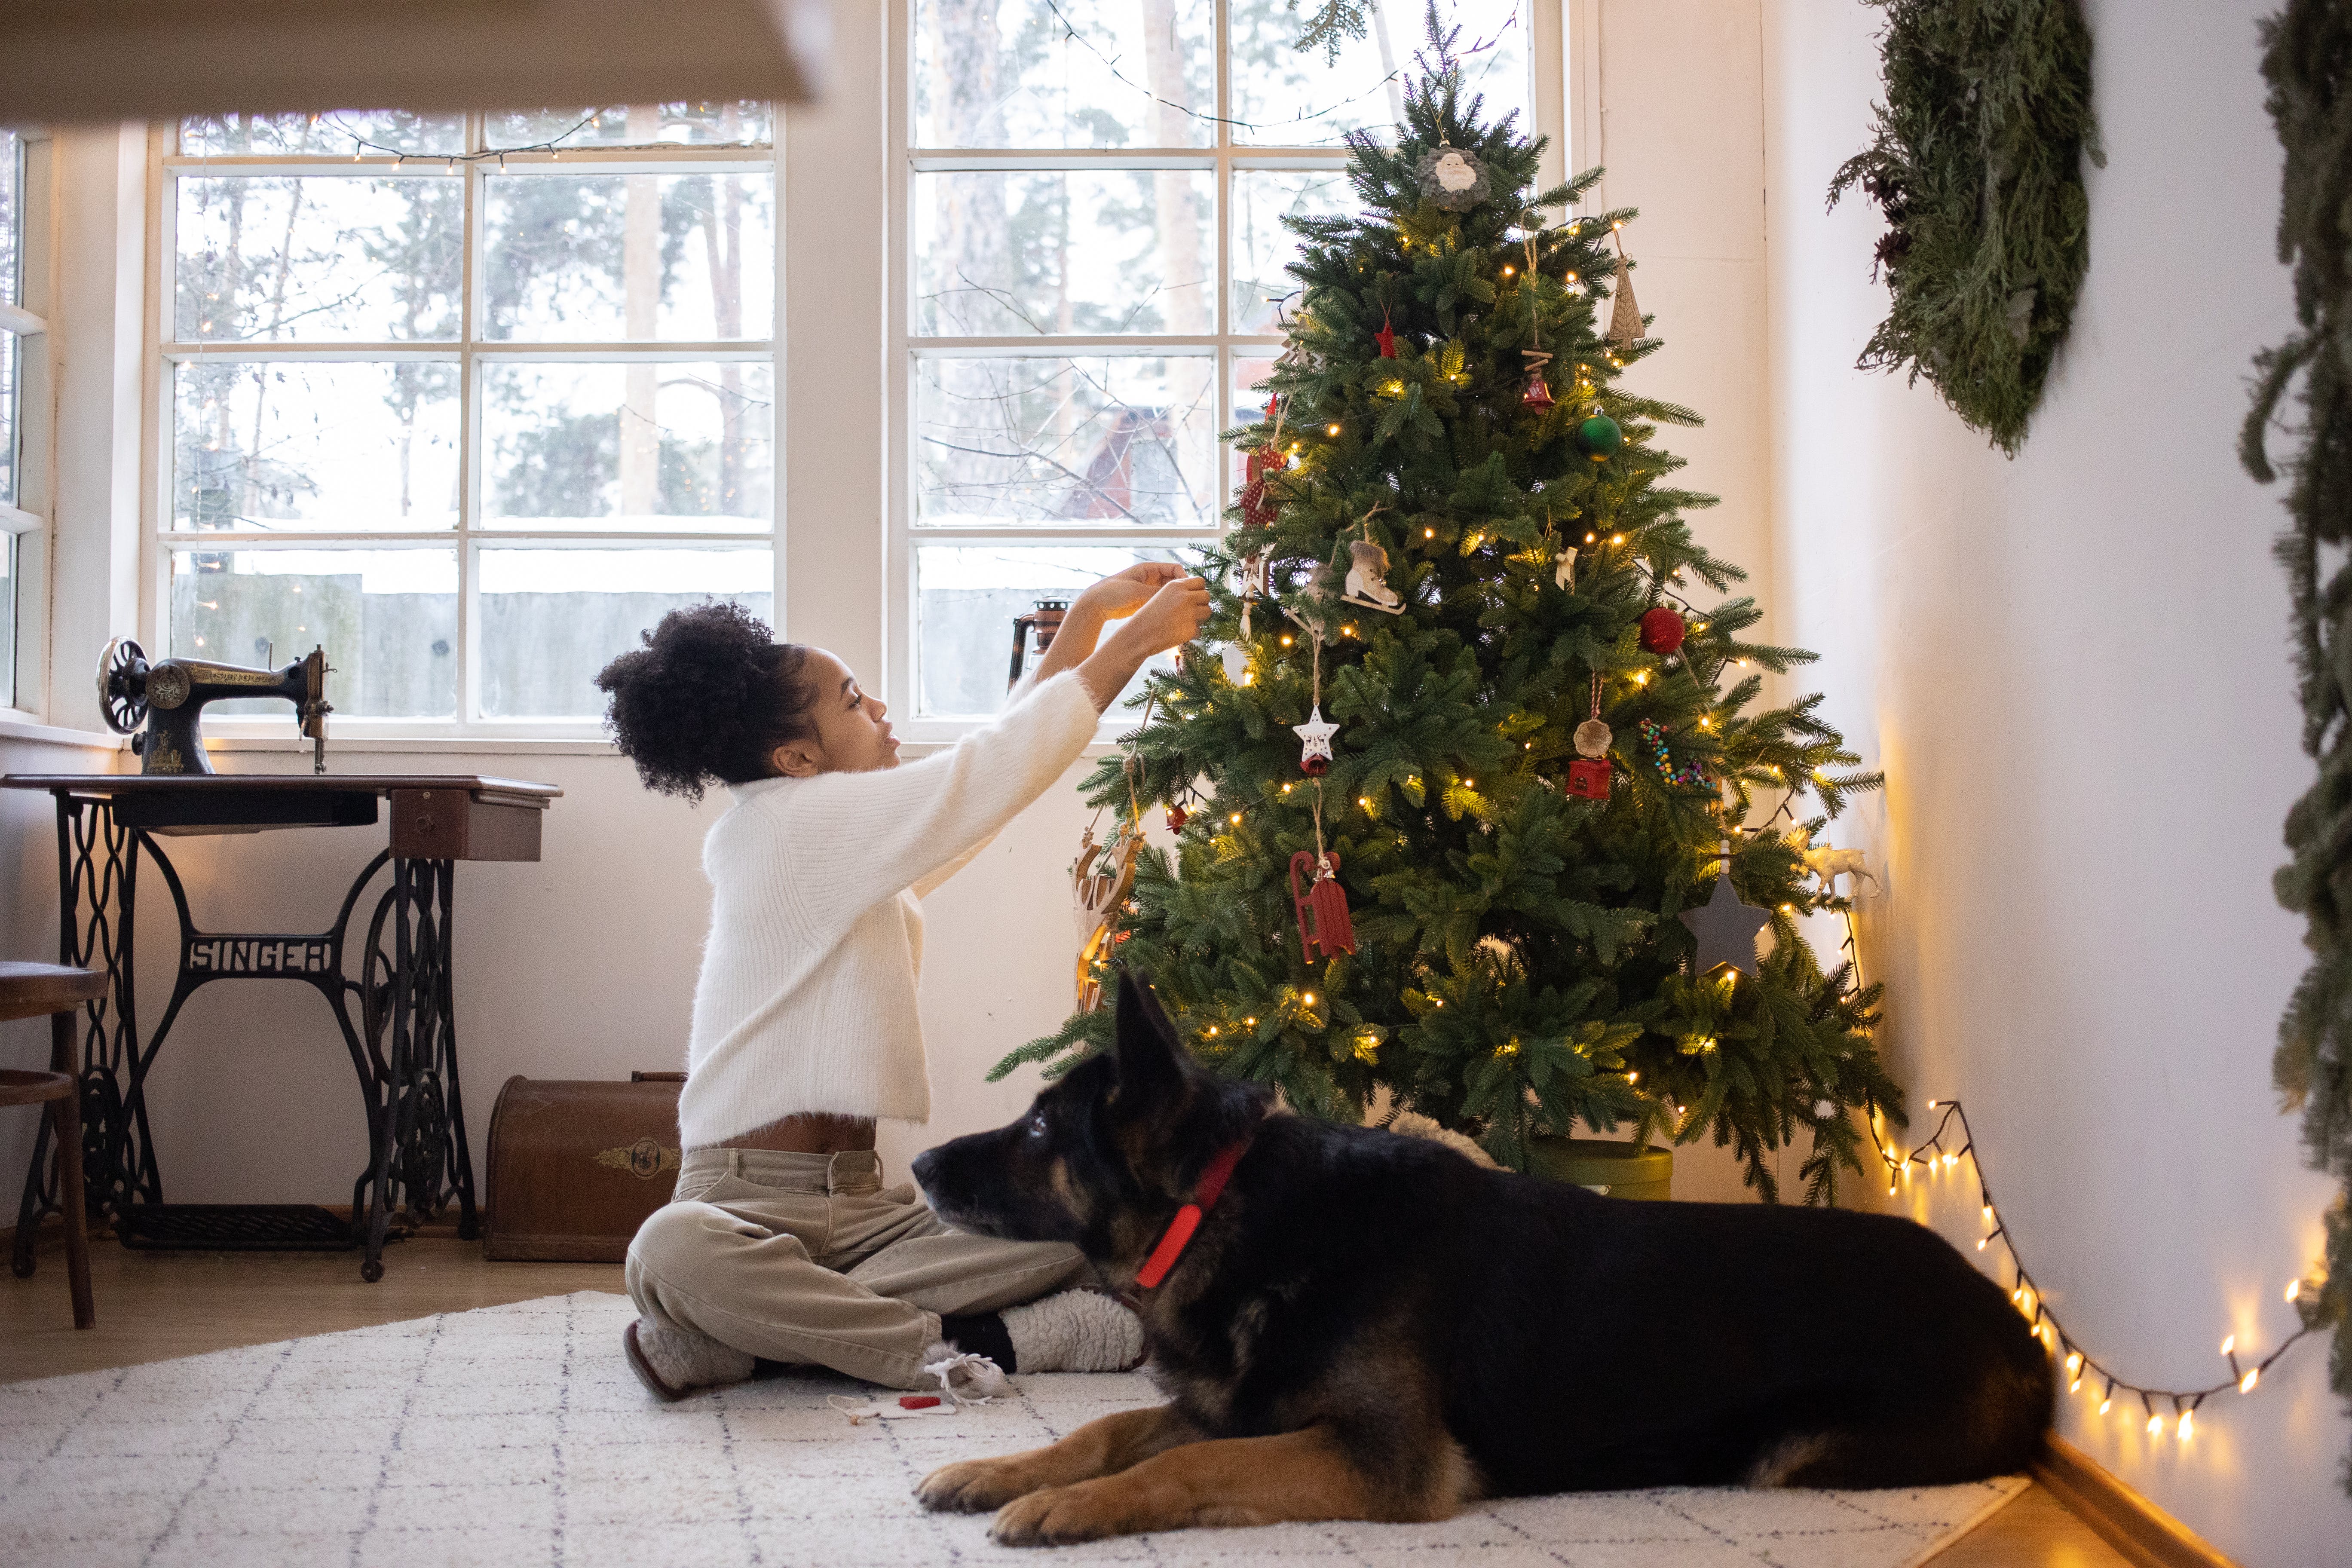 Wholesome Wags and Festive Fun: 7 Heartwarming Ideas To Try With Your Dog